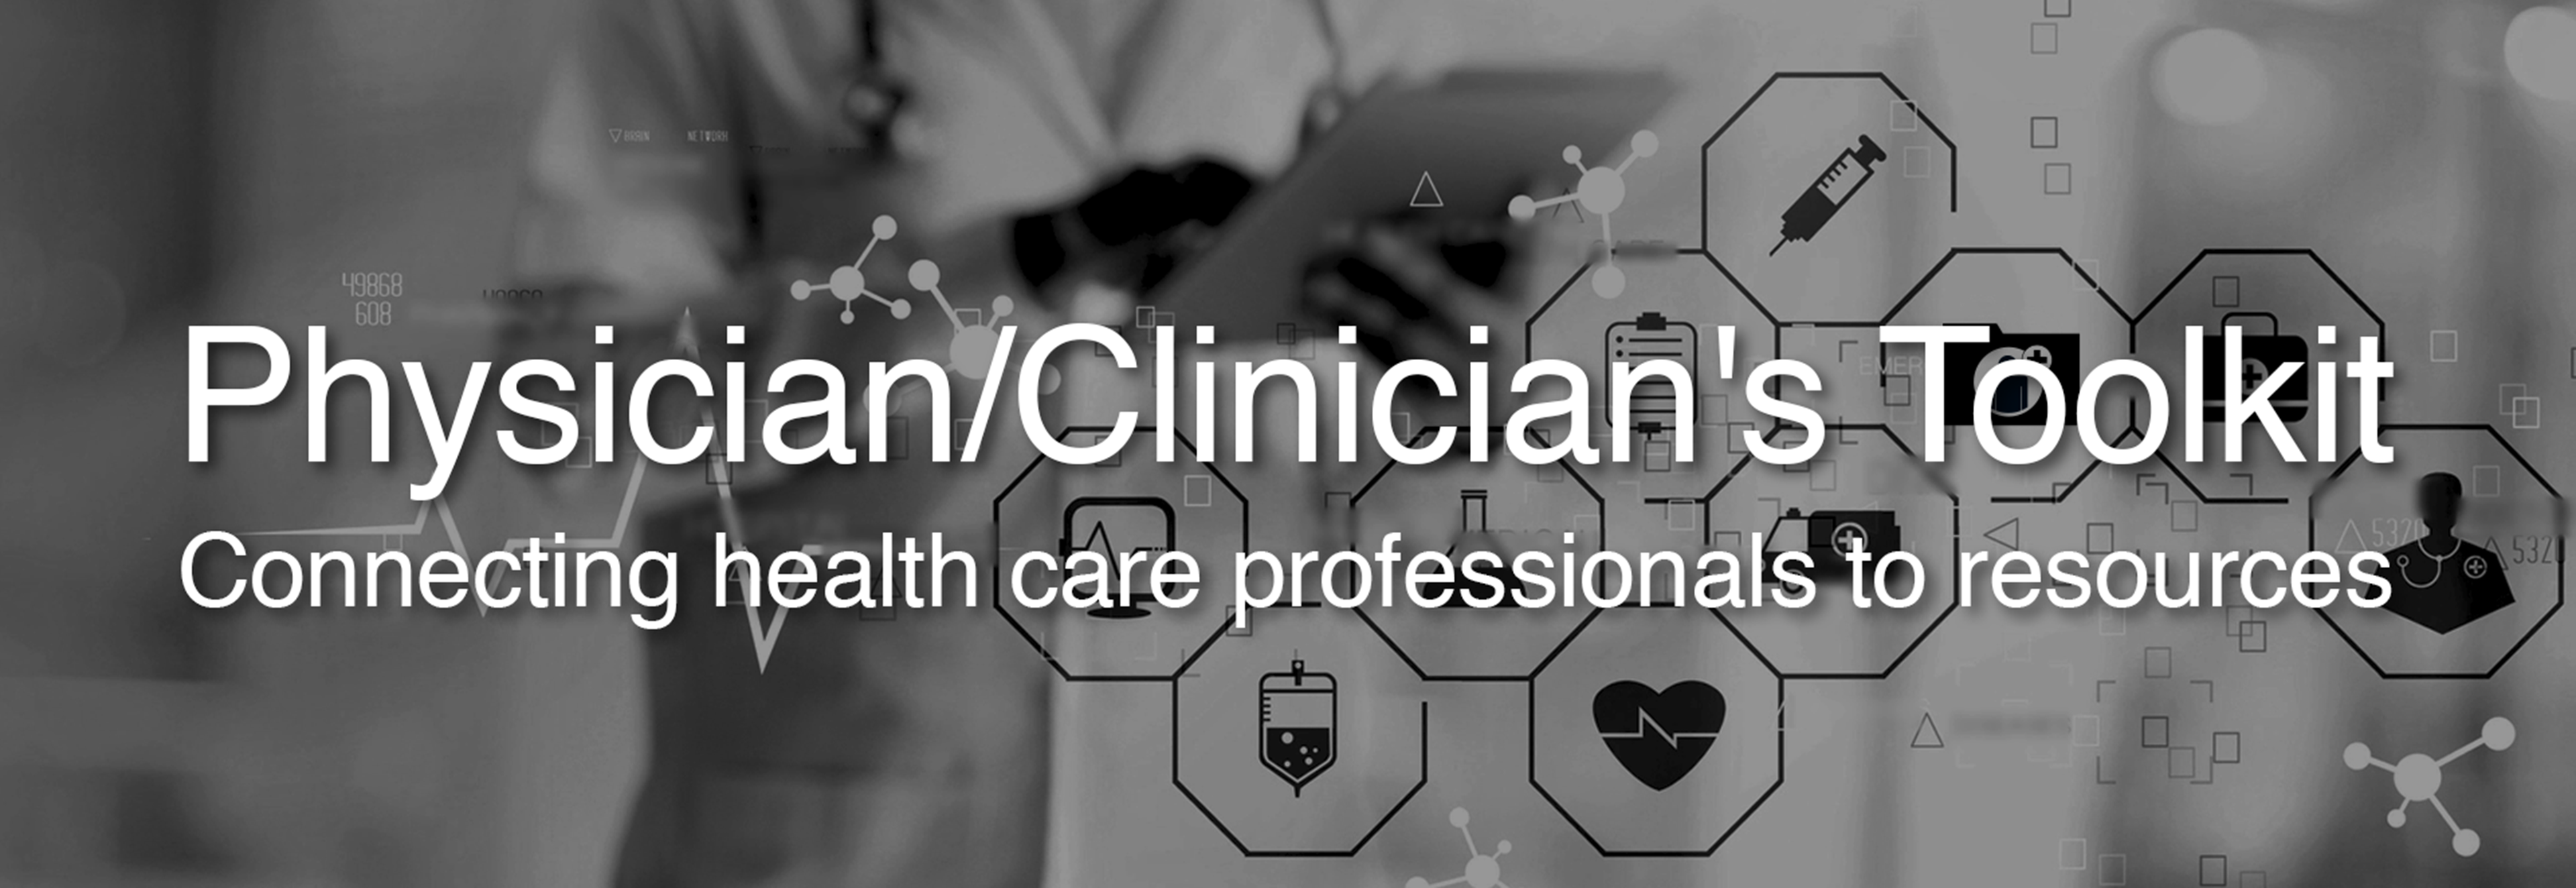 Physician/Clinicians Toolkit. Connecting health care professionals to resources